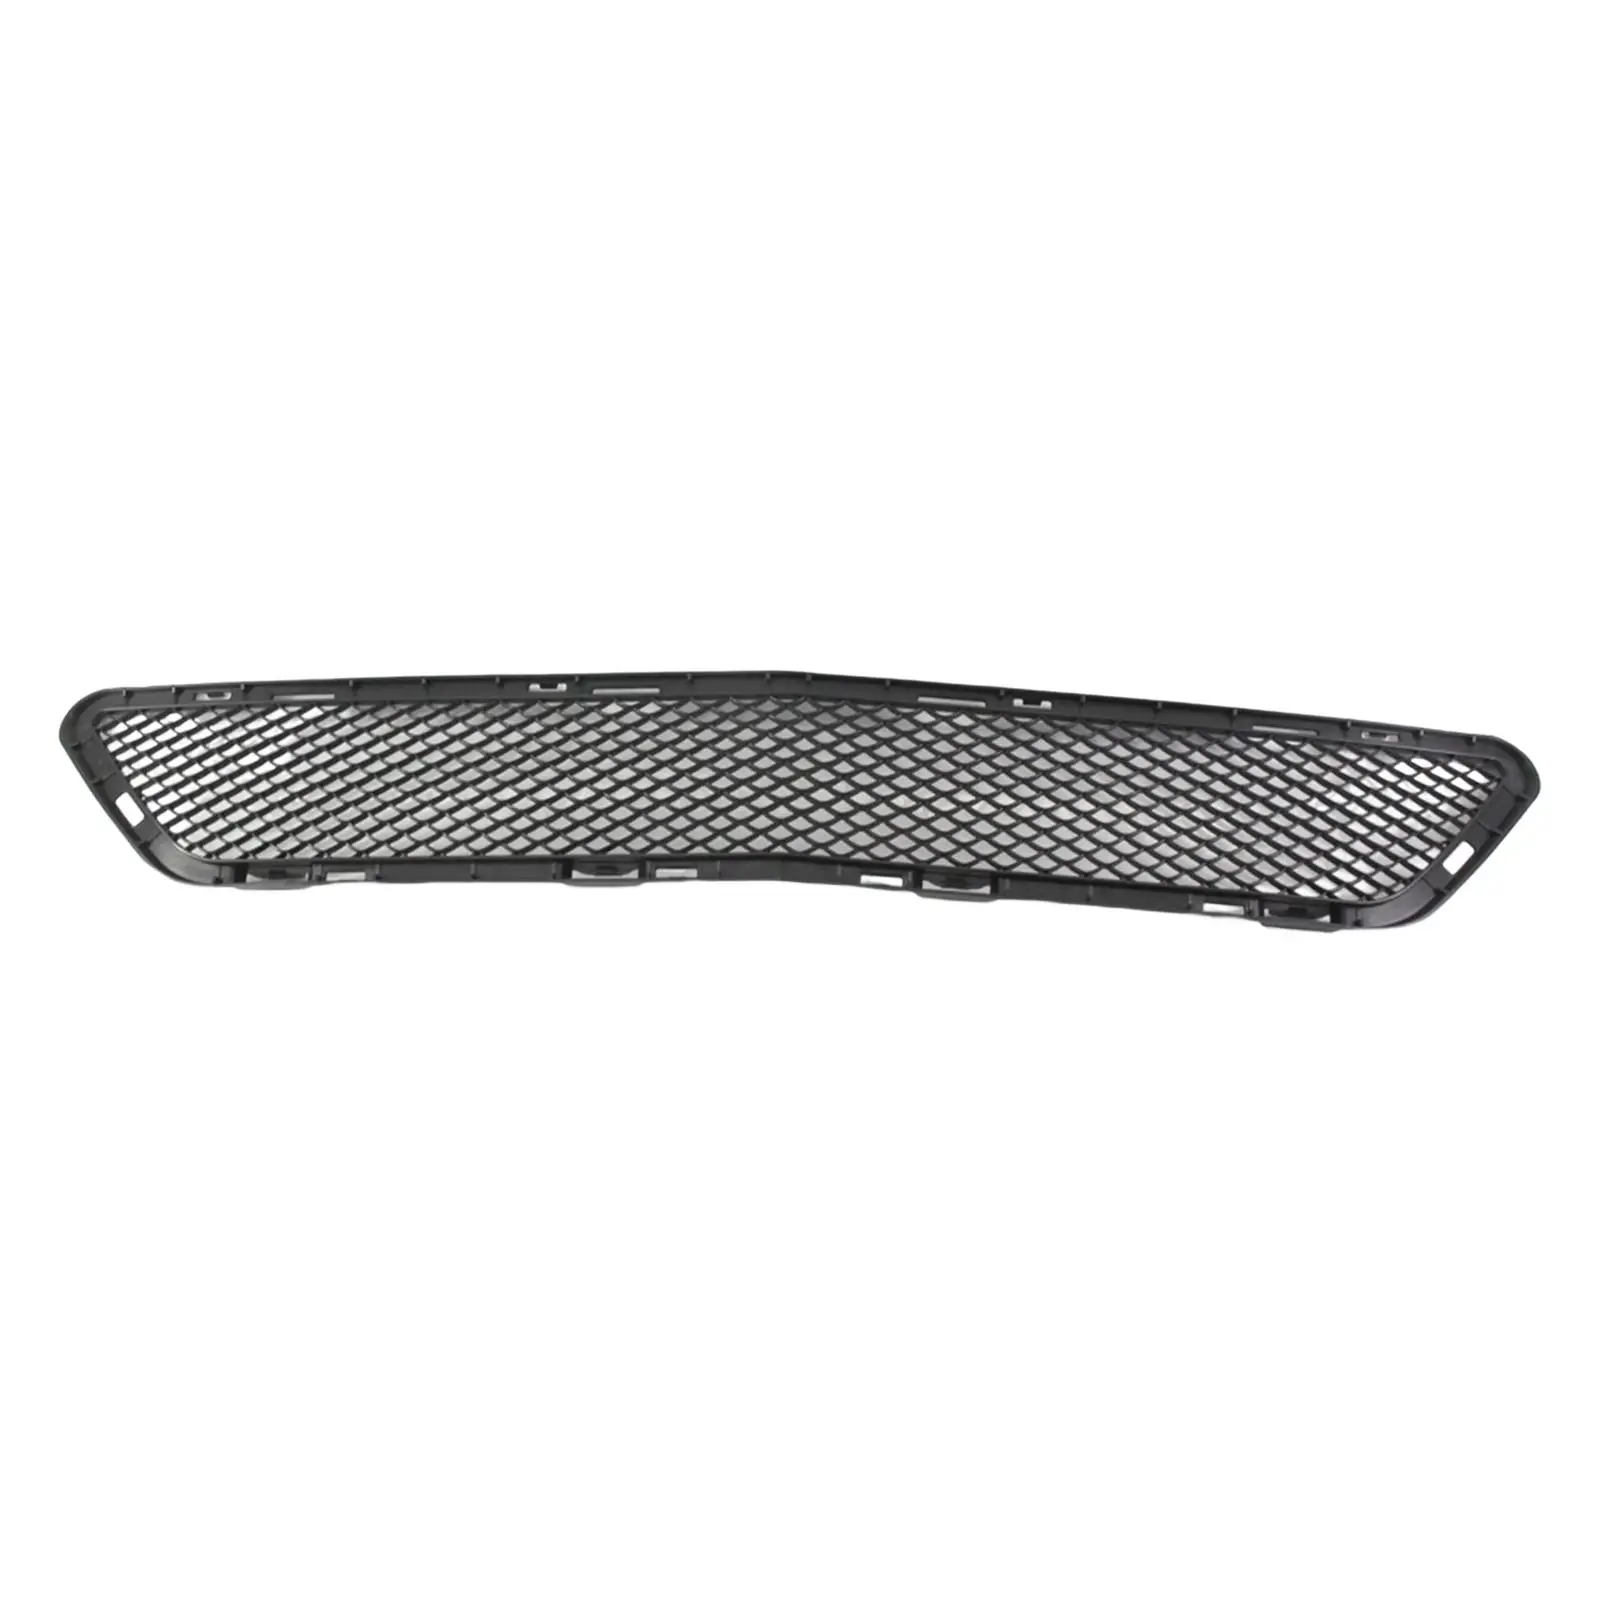 Front bumpers Lower Grill Grille Front bumpers Lower Center Grill Cover for x204 Facelift